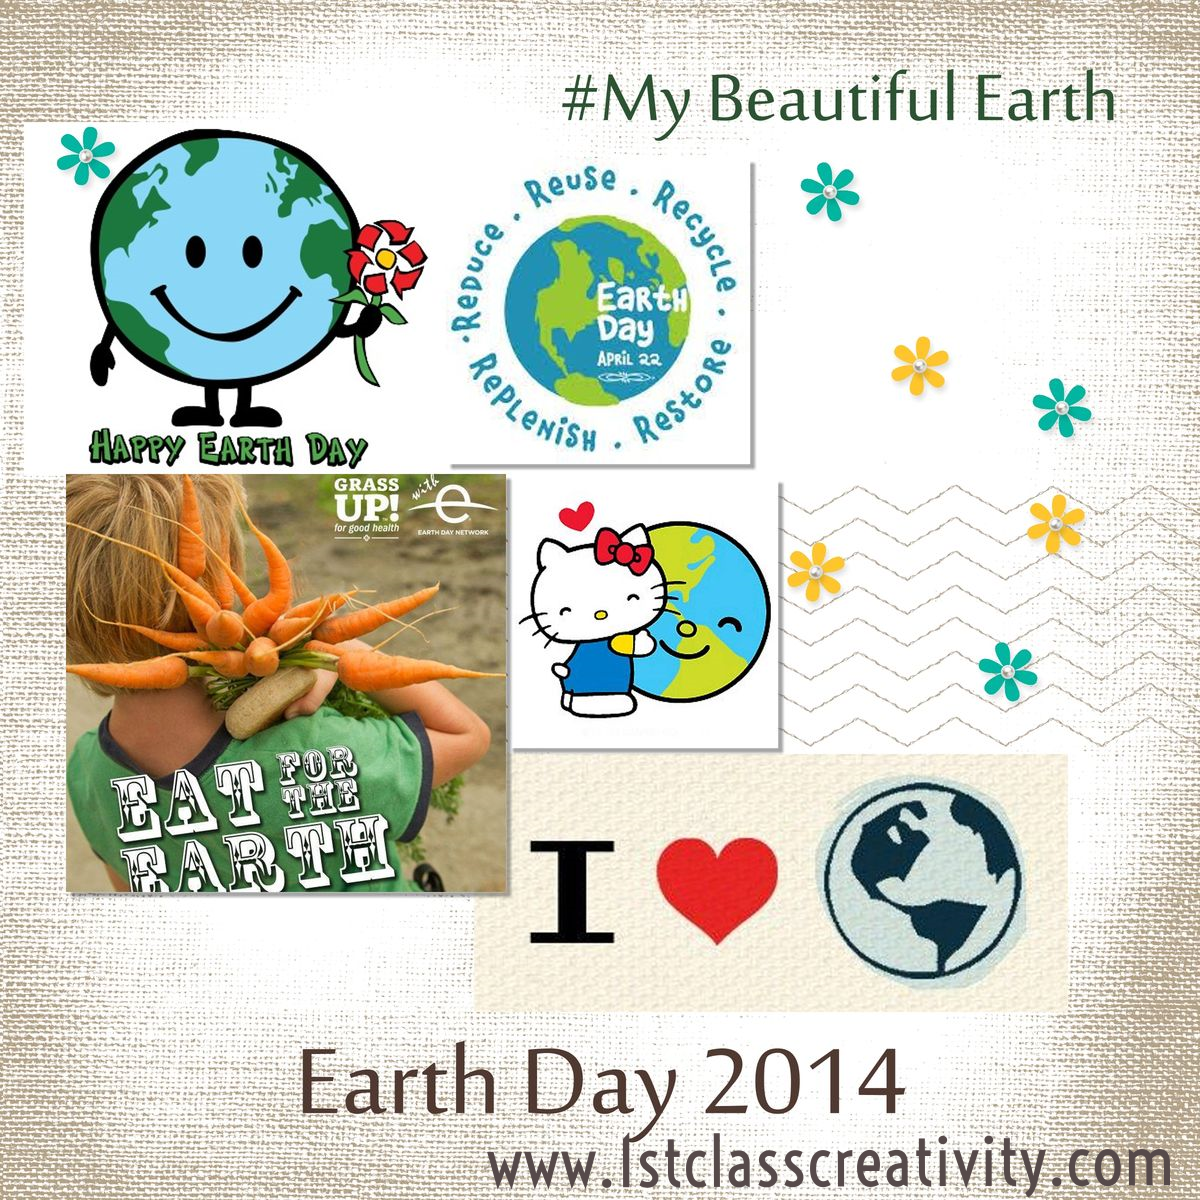 Is Mother Earth Capitalized - The Earth Images Revimage.Org